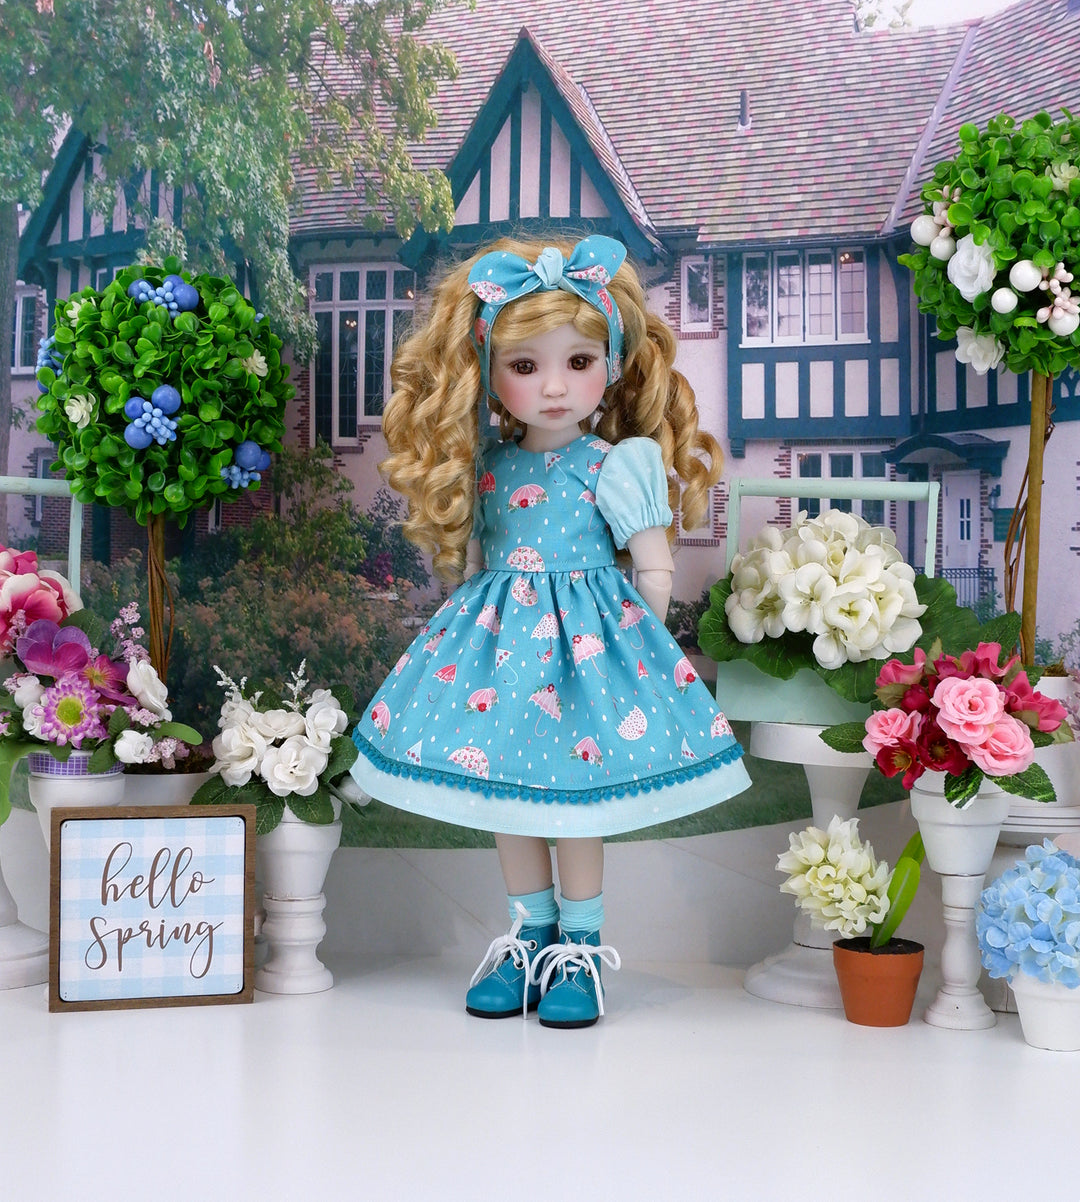 Spring Showers - dress and boots for Ruby Red Fashion Friends doll